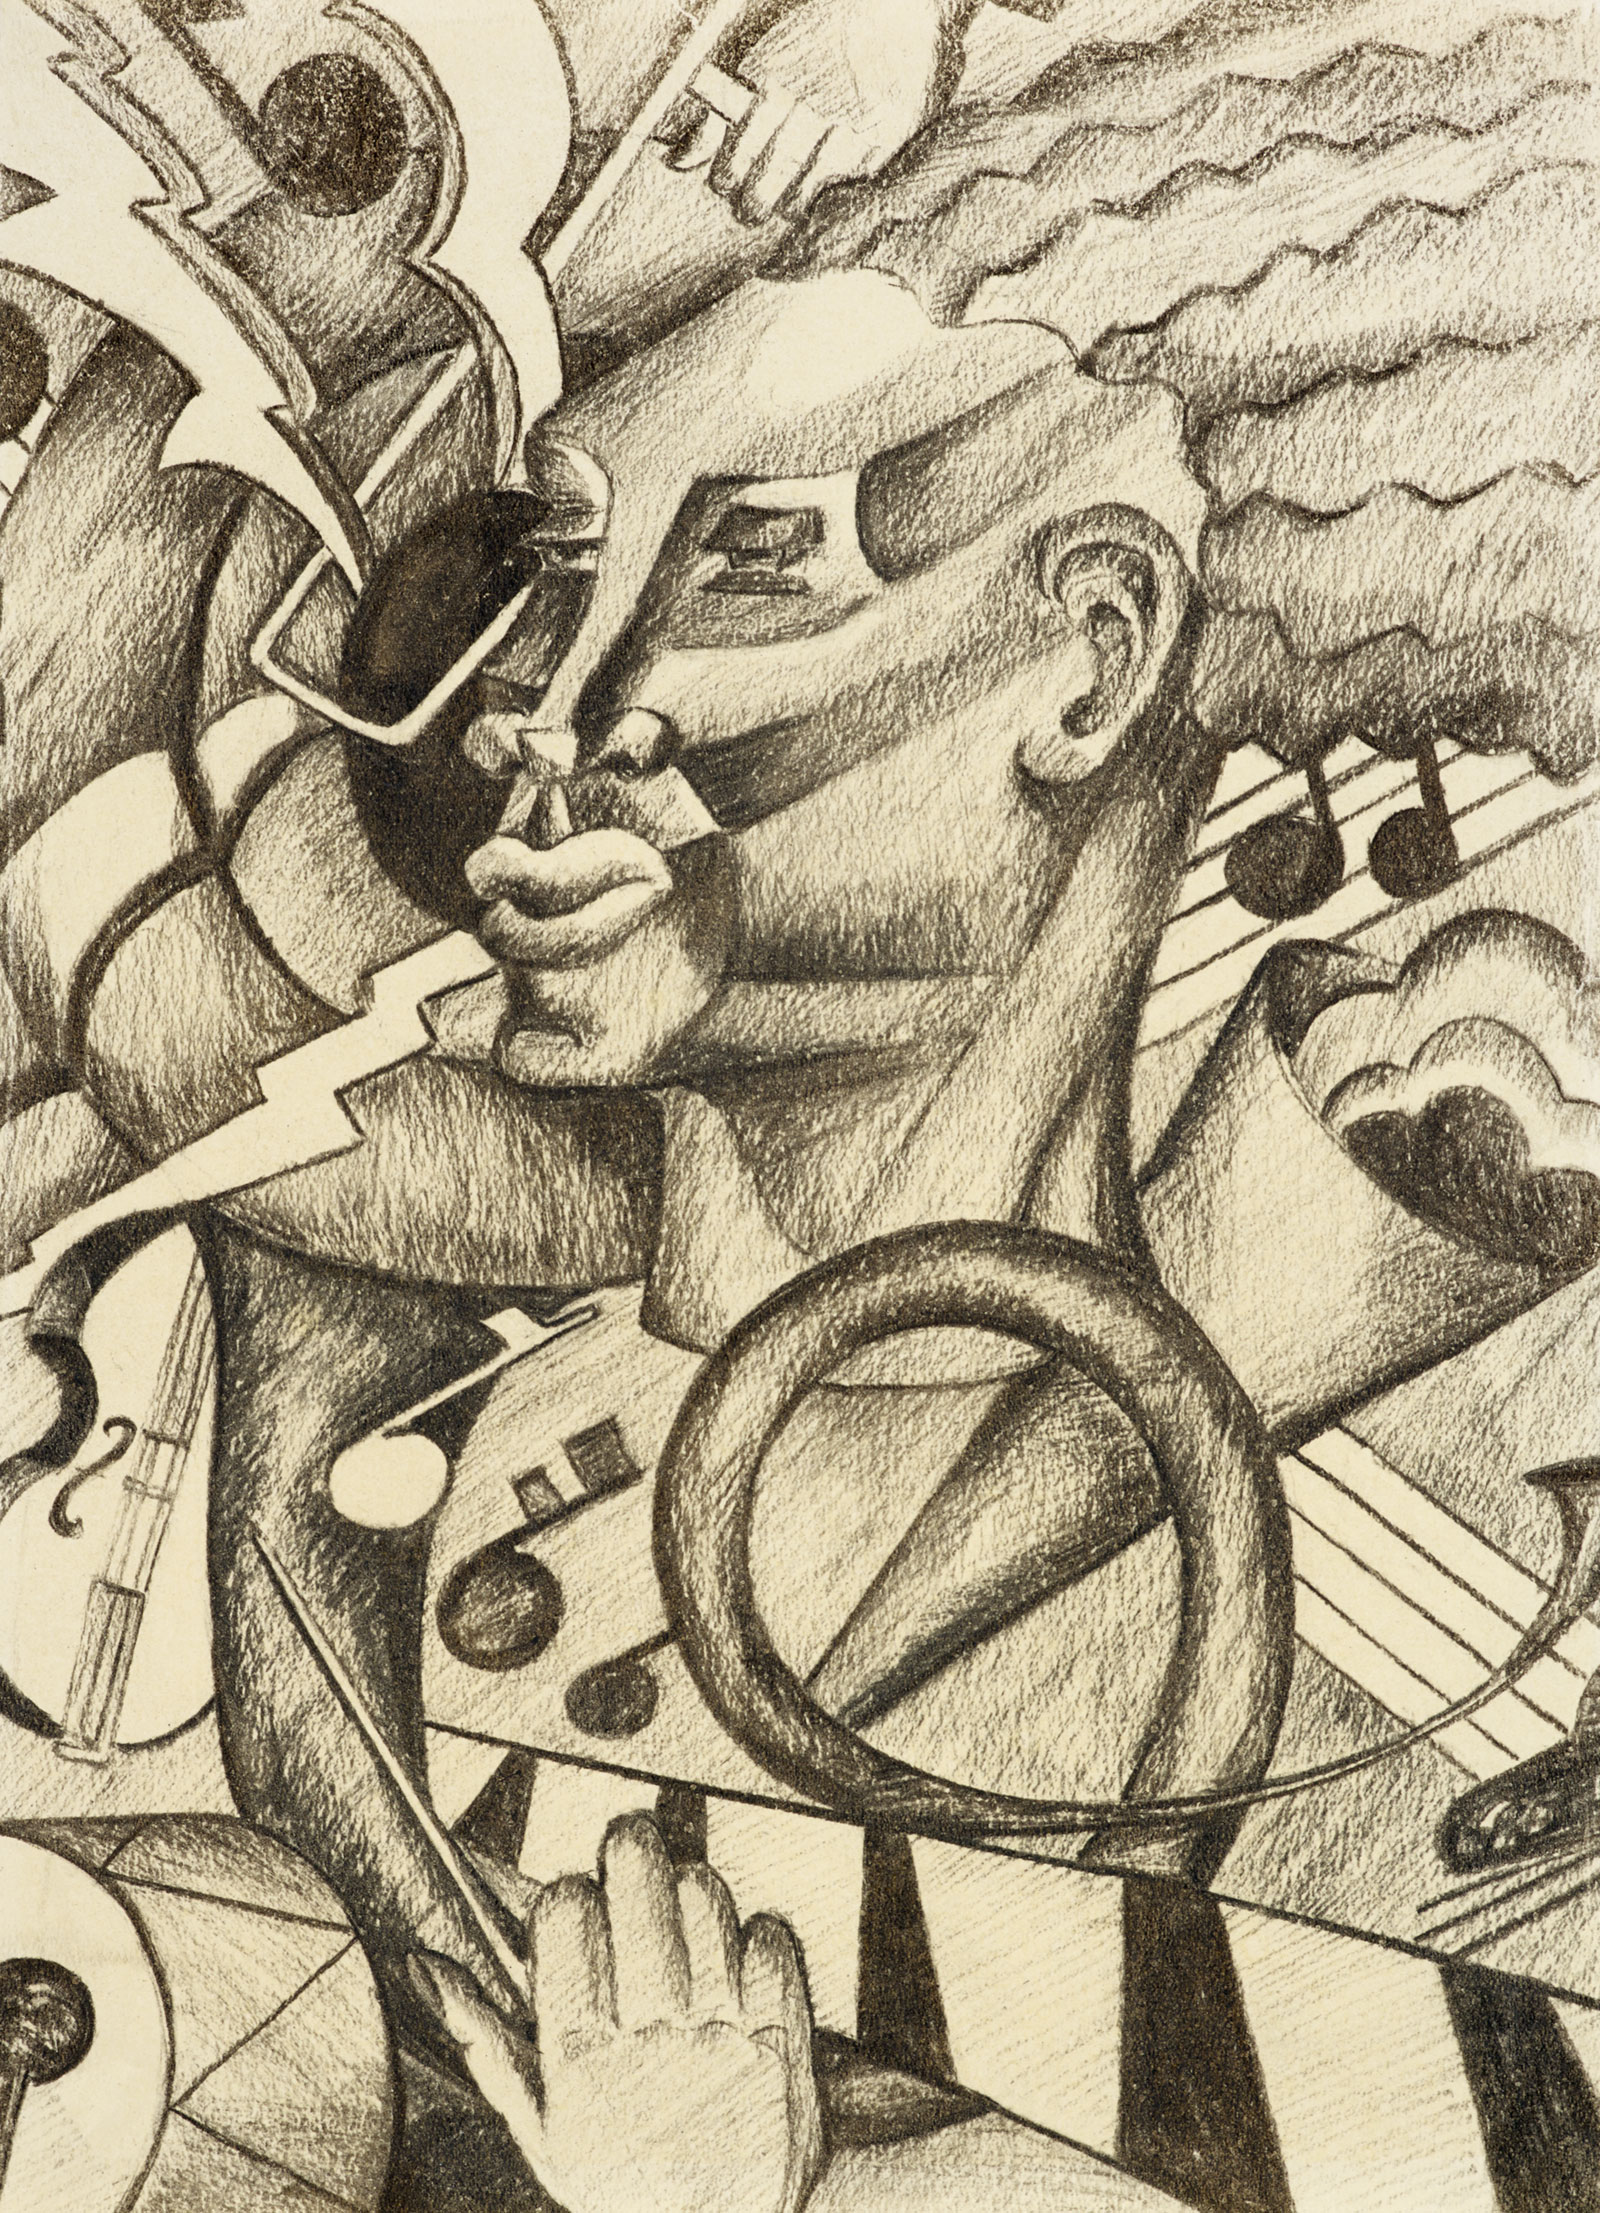 Drawing of a jazz musician